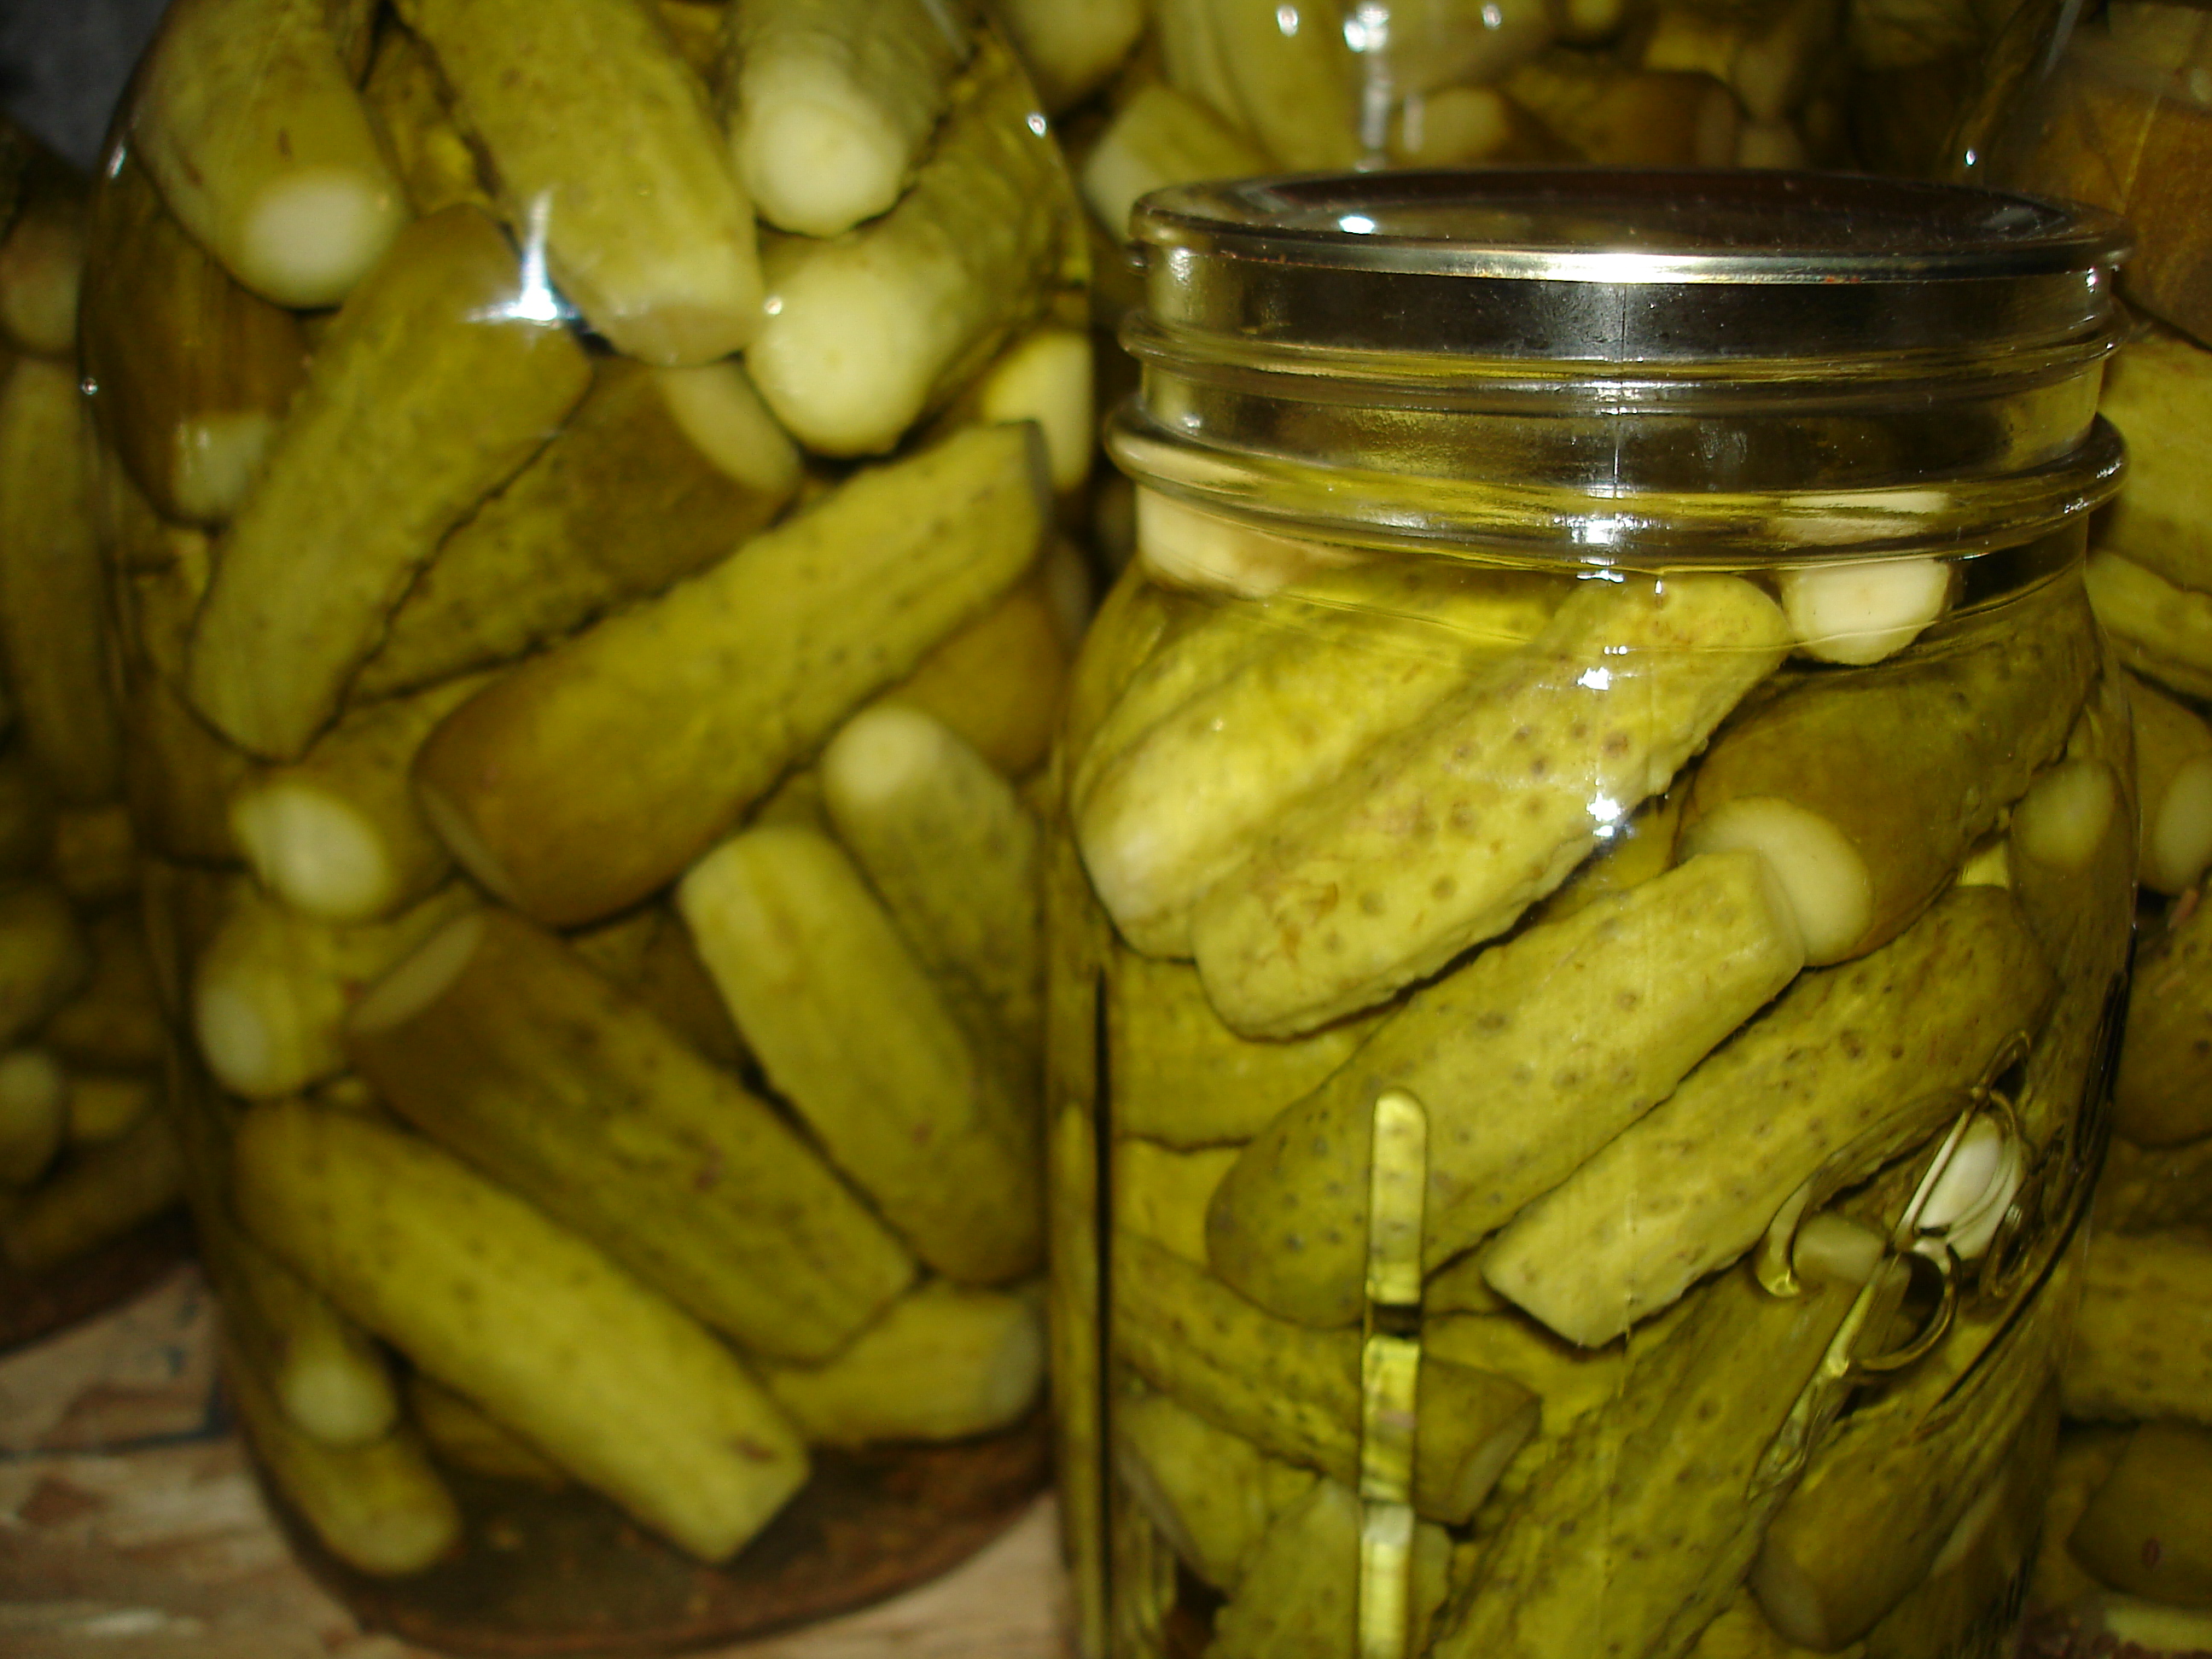 Pickles Full Hd Wallpaper And Background Image 2592x1944 HD Wallpapers Download Free Map Images Wallpaper [wallpaper376.blogspot.com]